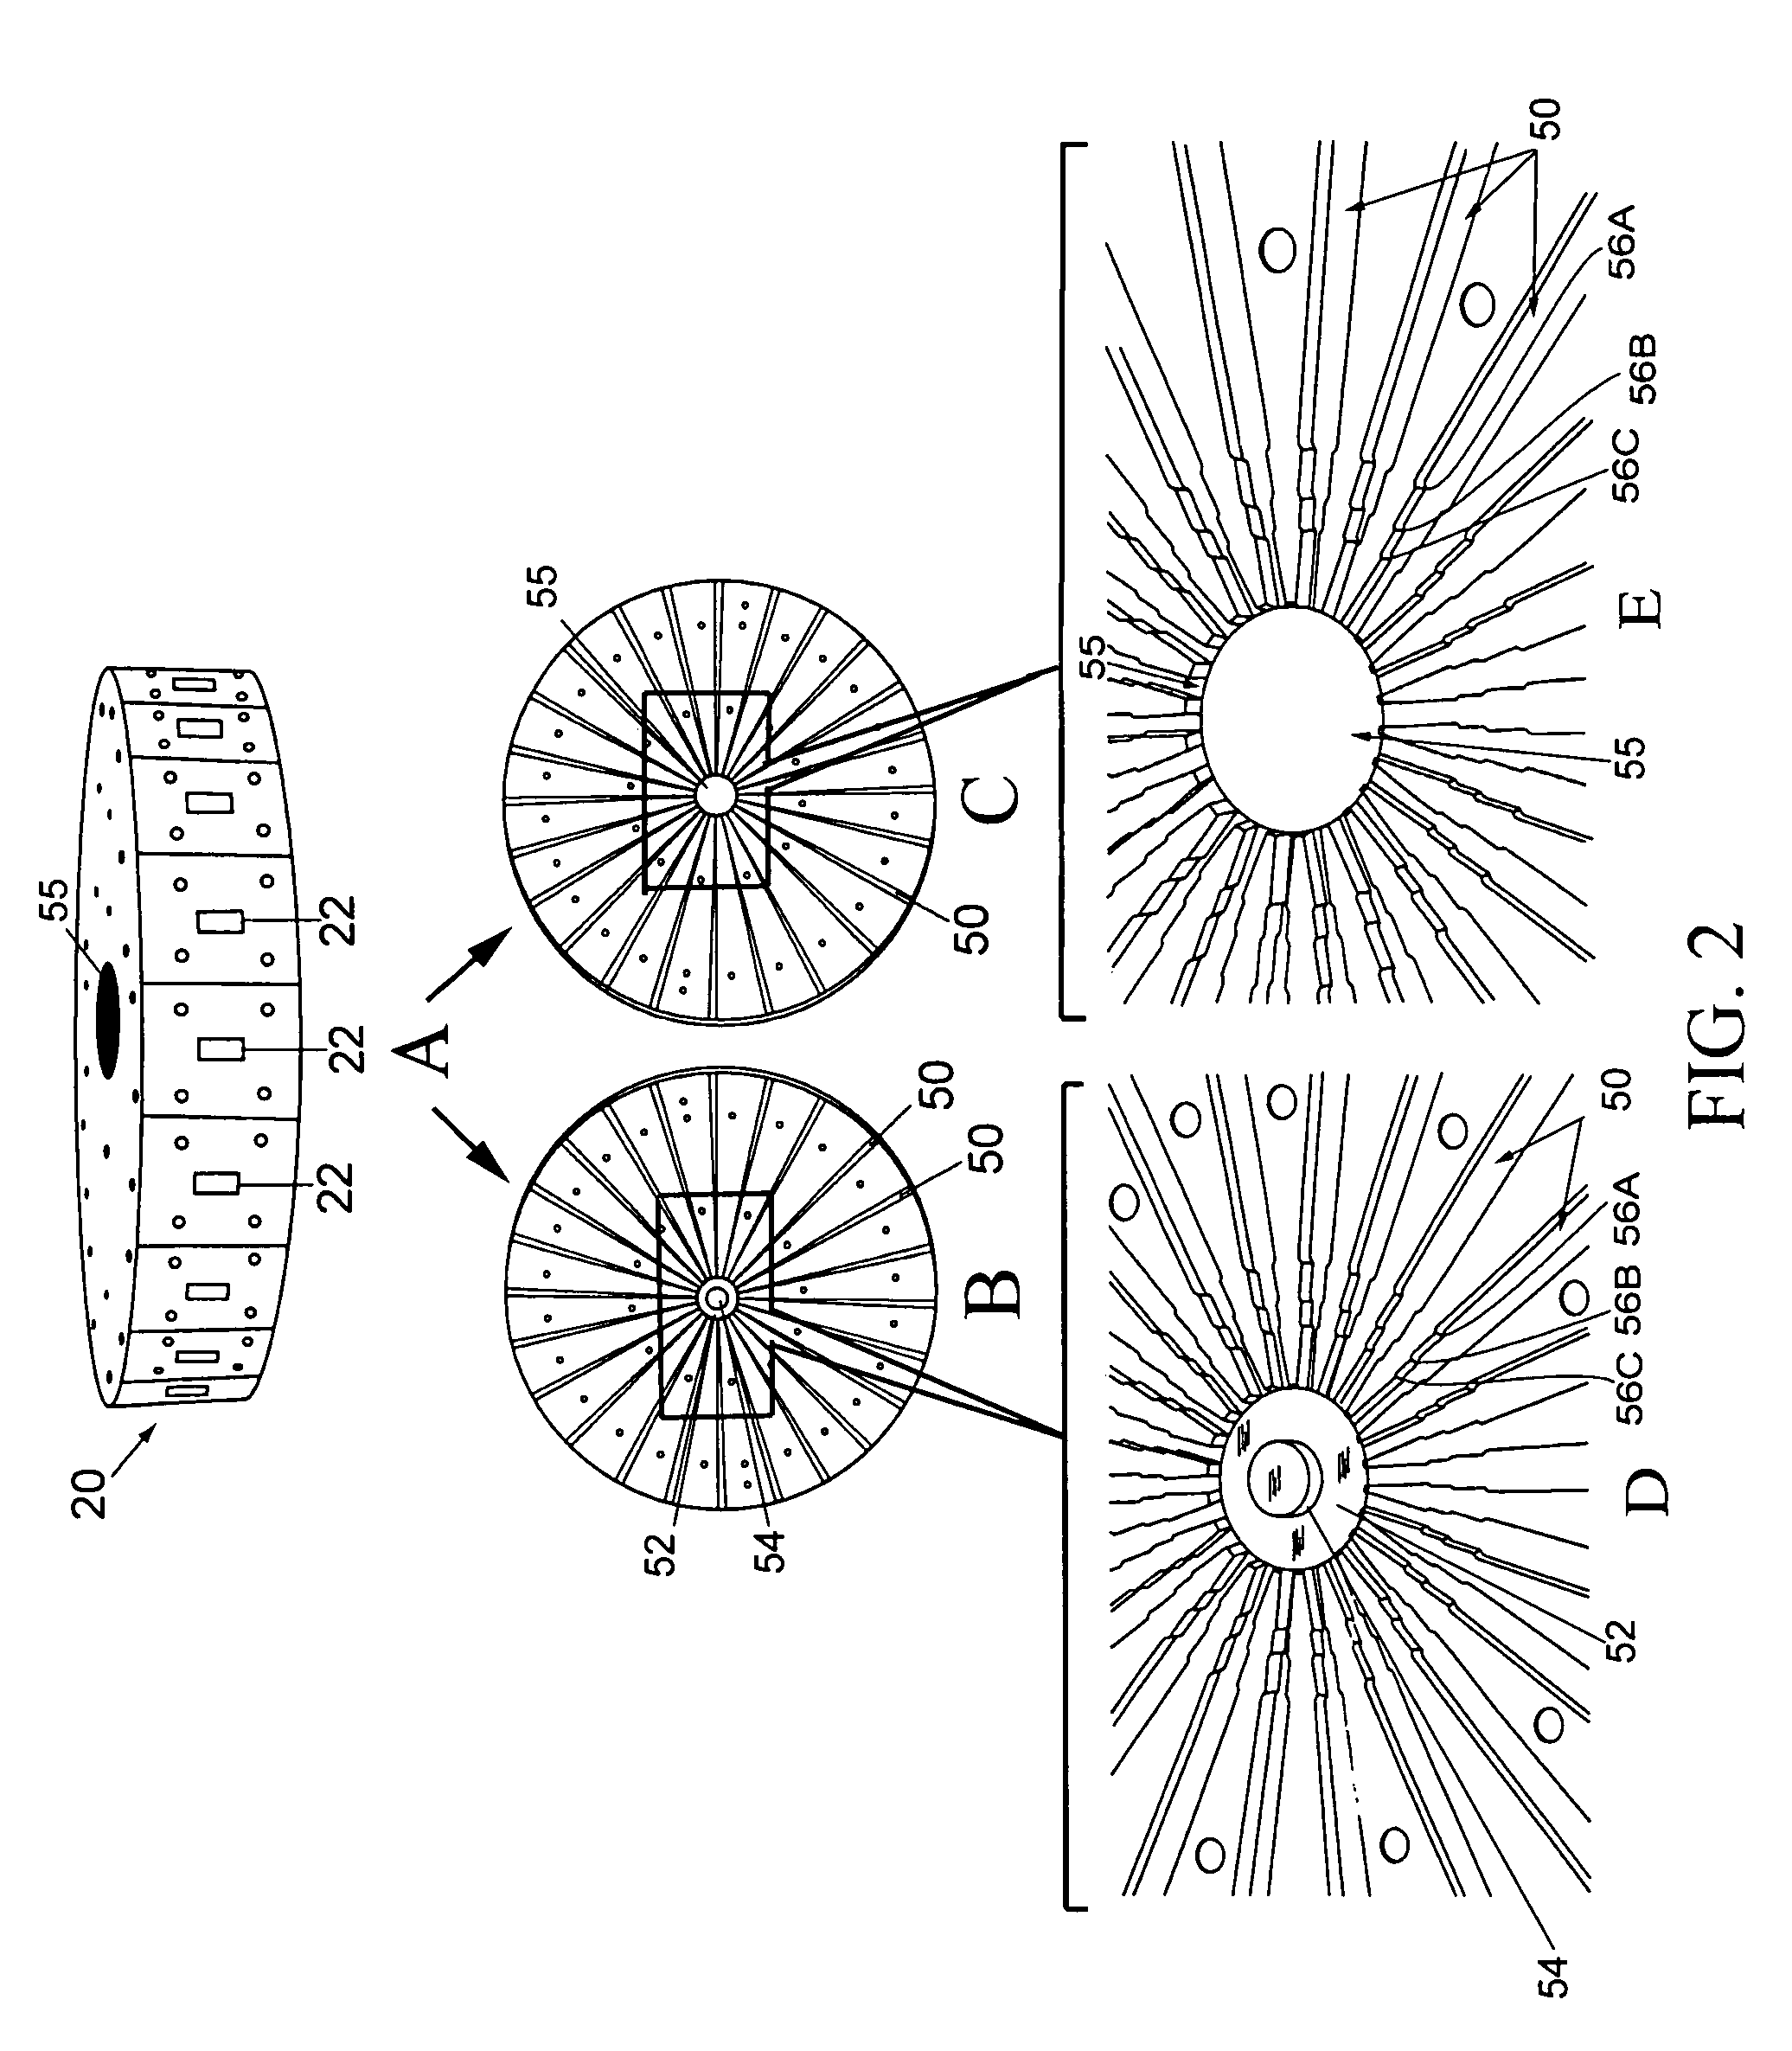 Wideband radial power combiner/divider fed by a mode transducer